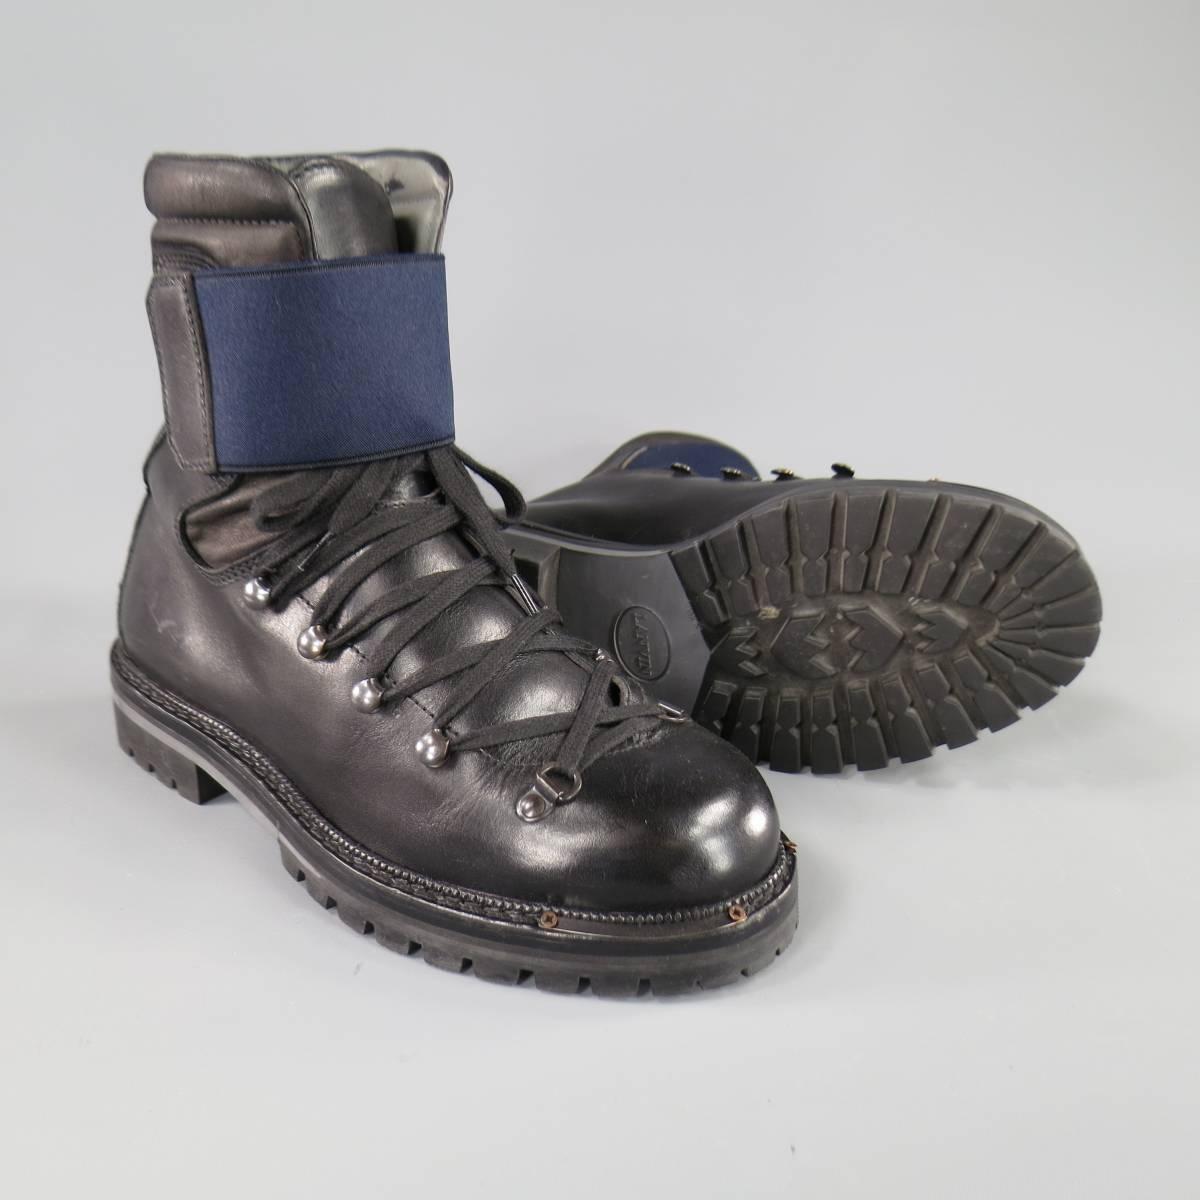 Men's LANVIN Size 8 Black Leather Navy Strap Tall Mountain Boots